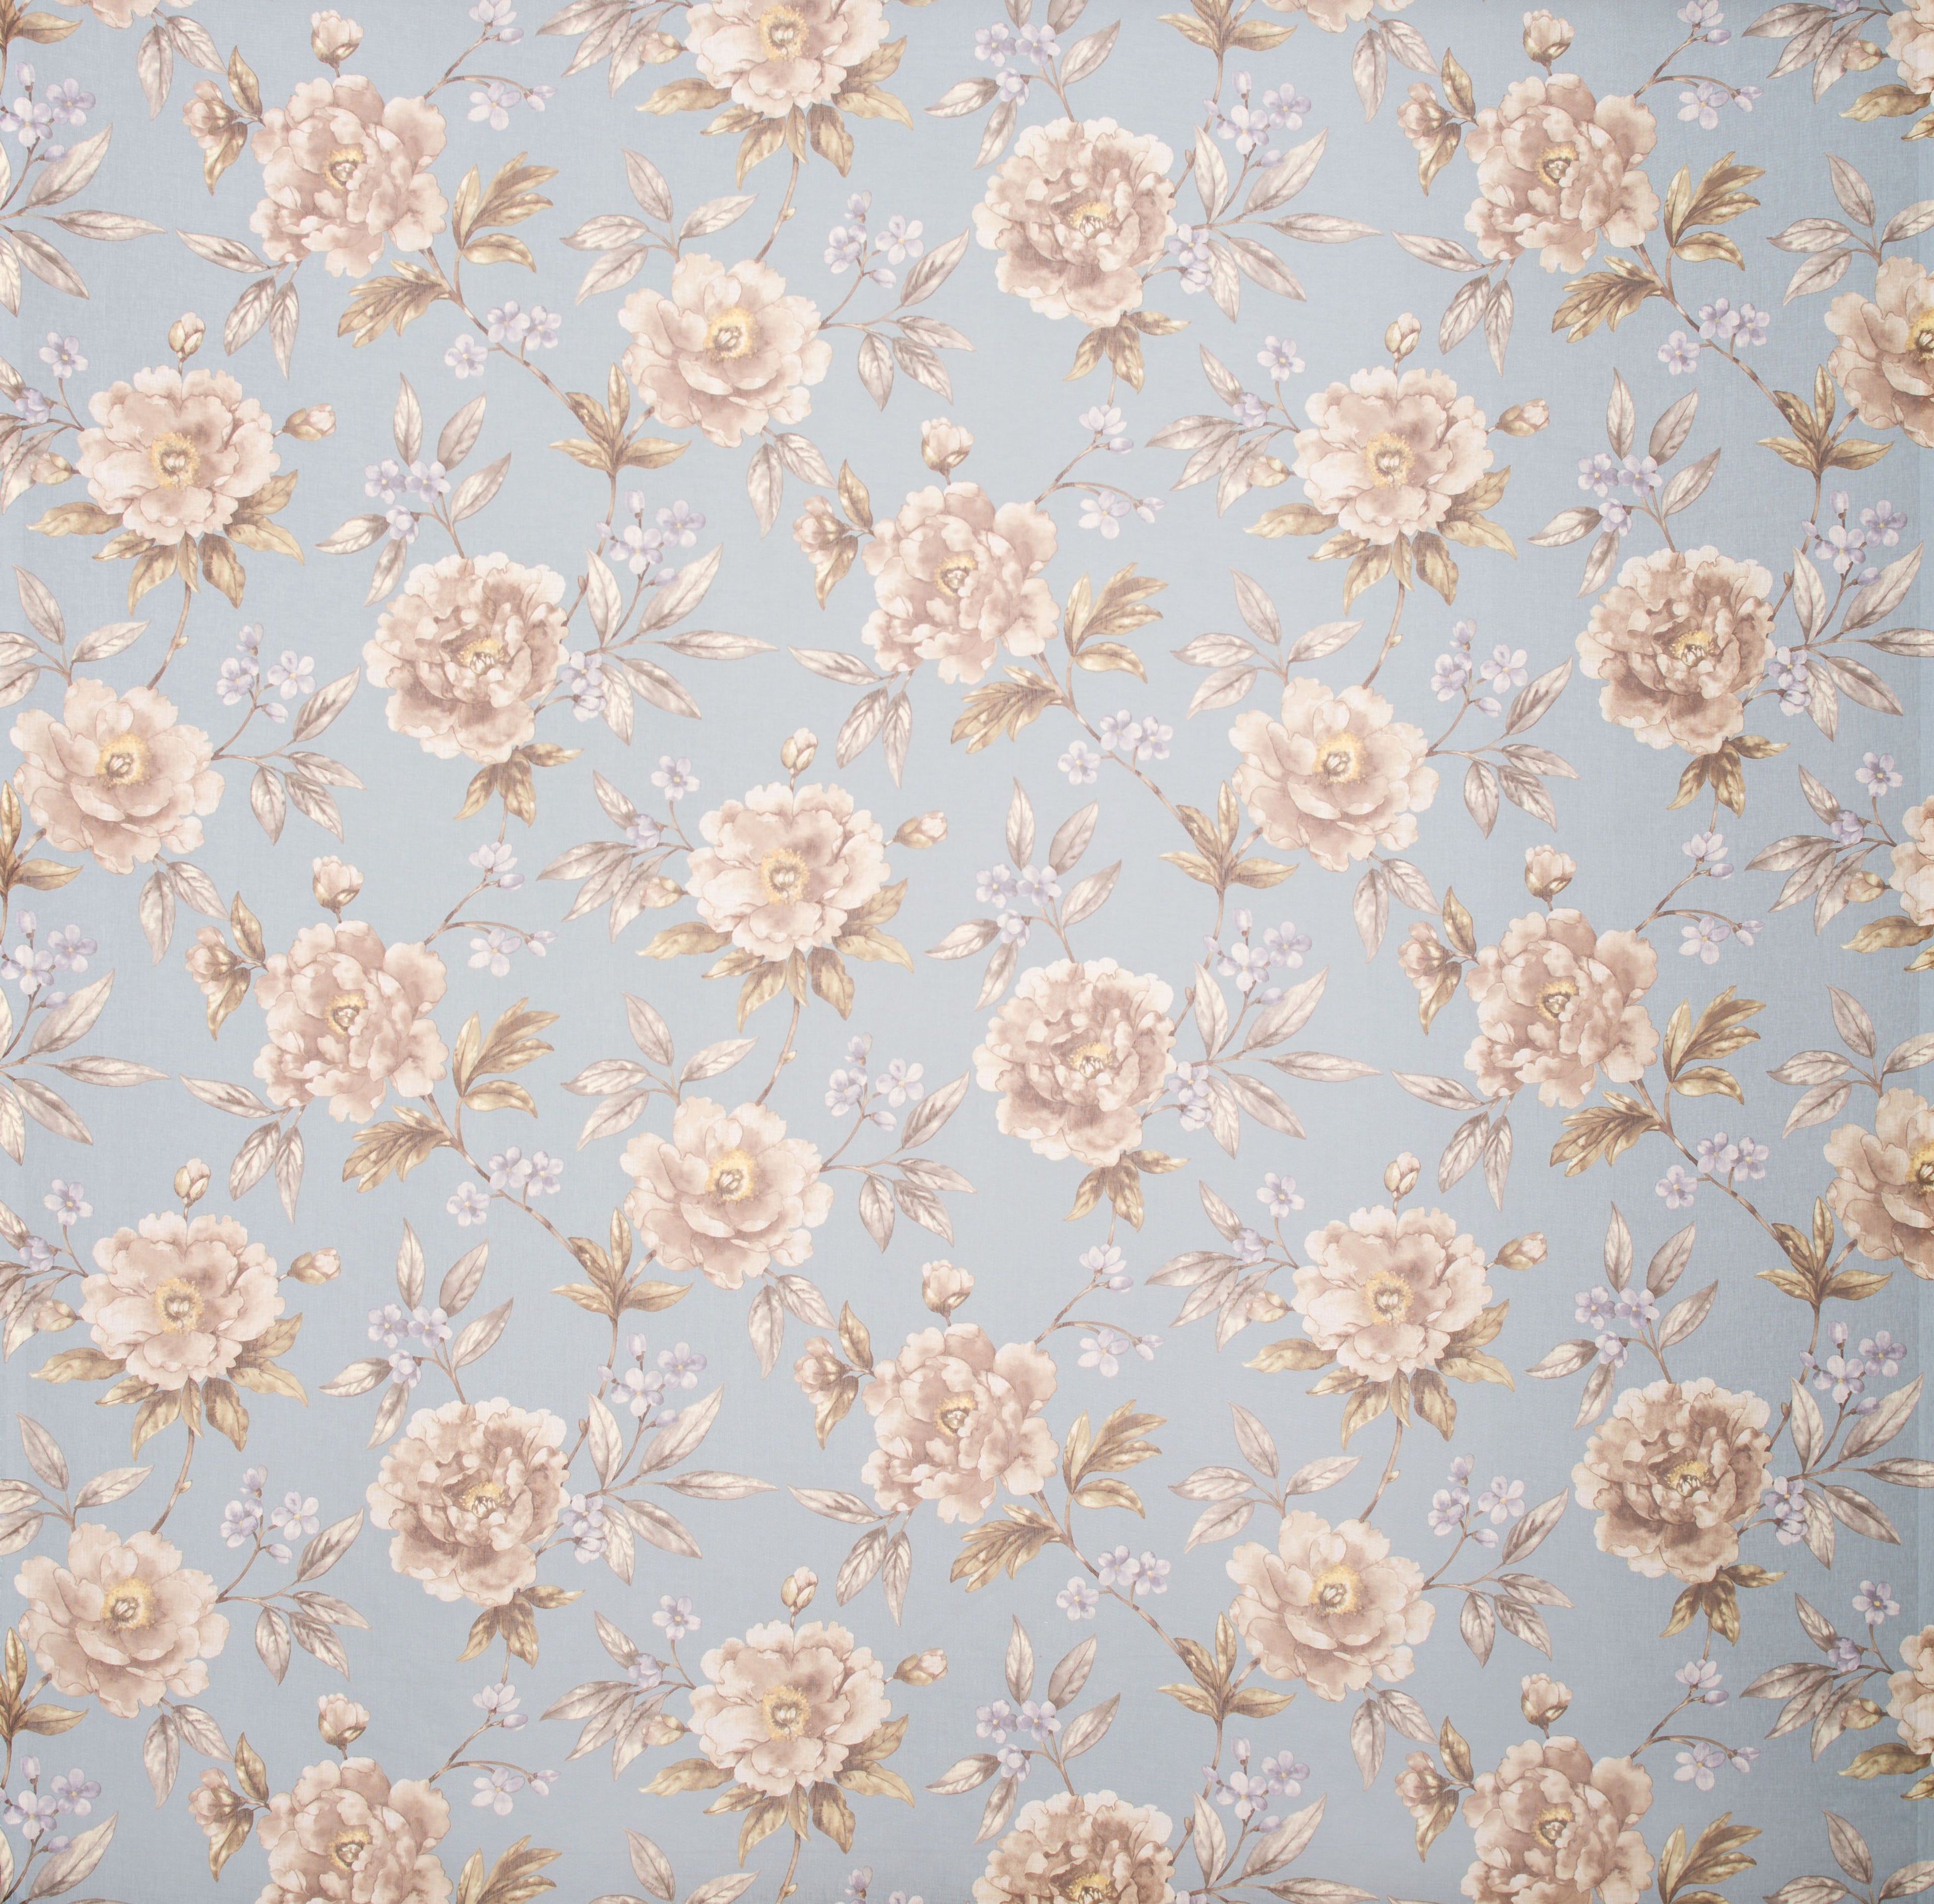 Rose Arbor fabric in bluestone color - pattern number HH 0002S806 - by Scalamandre in the Old World Weavers collection